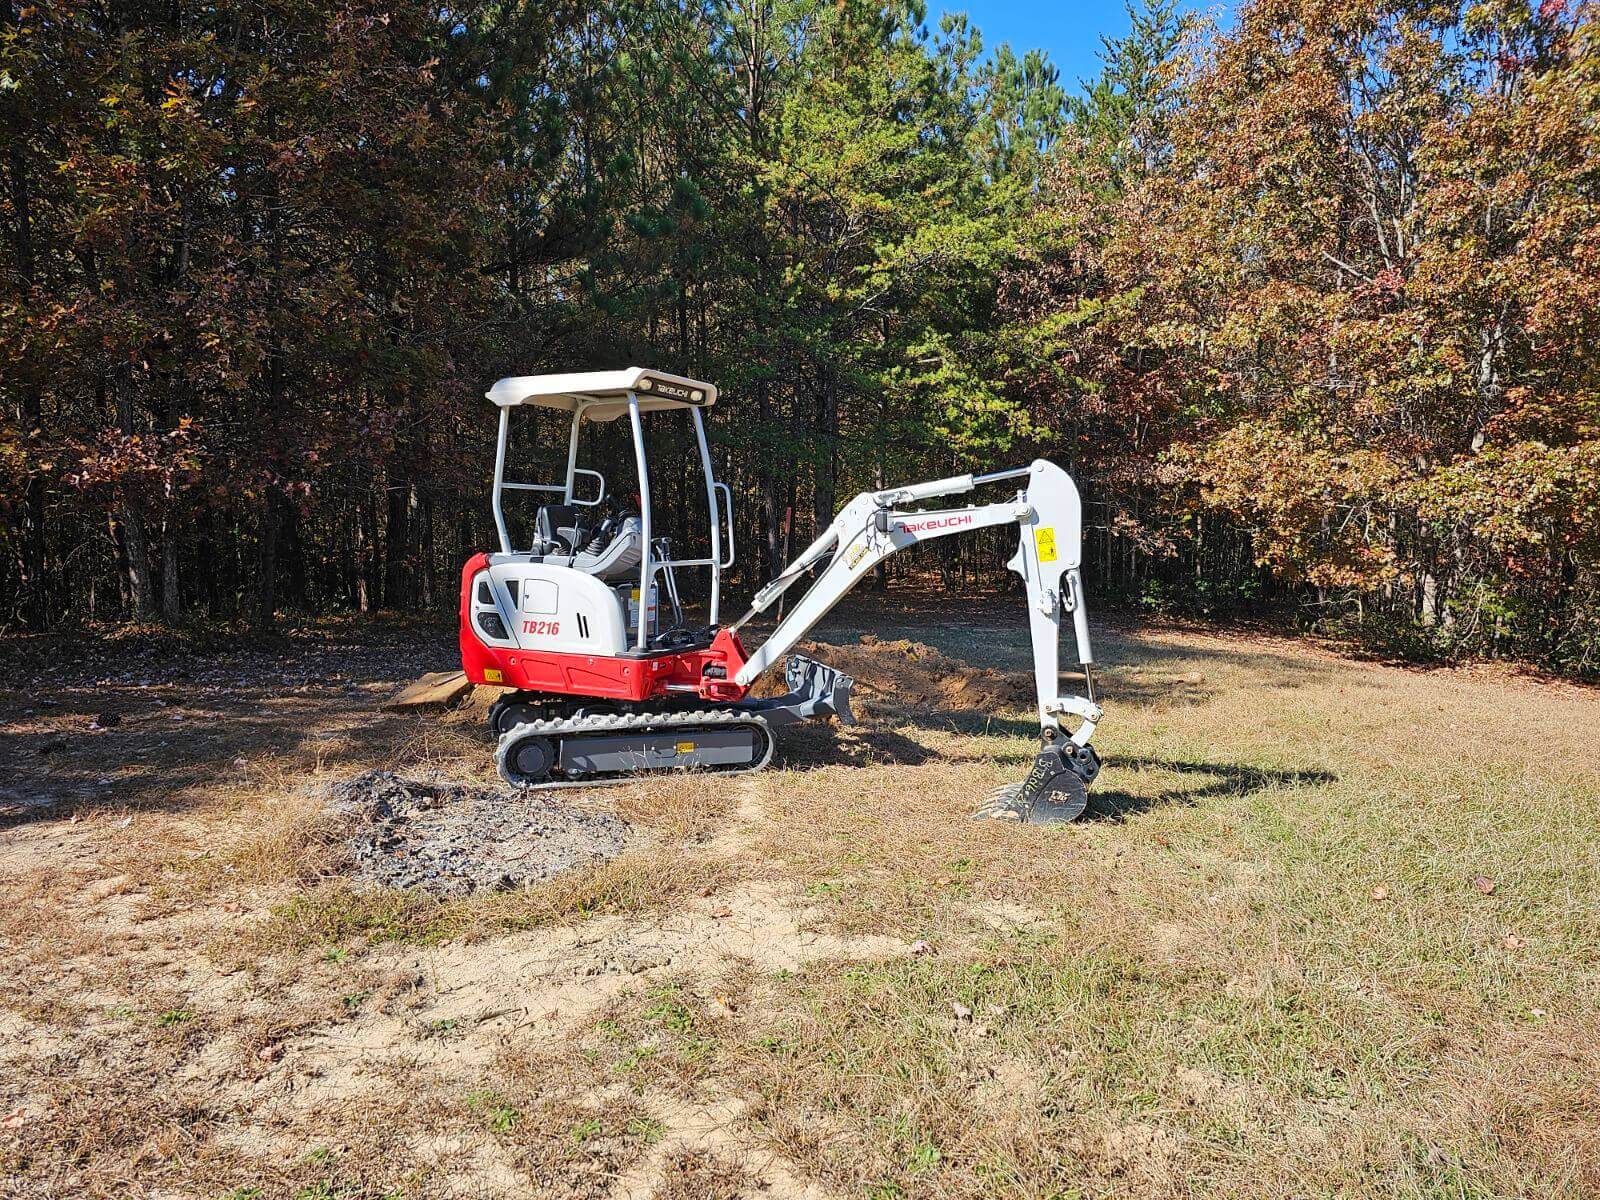 A red and white excavator in a field.